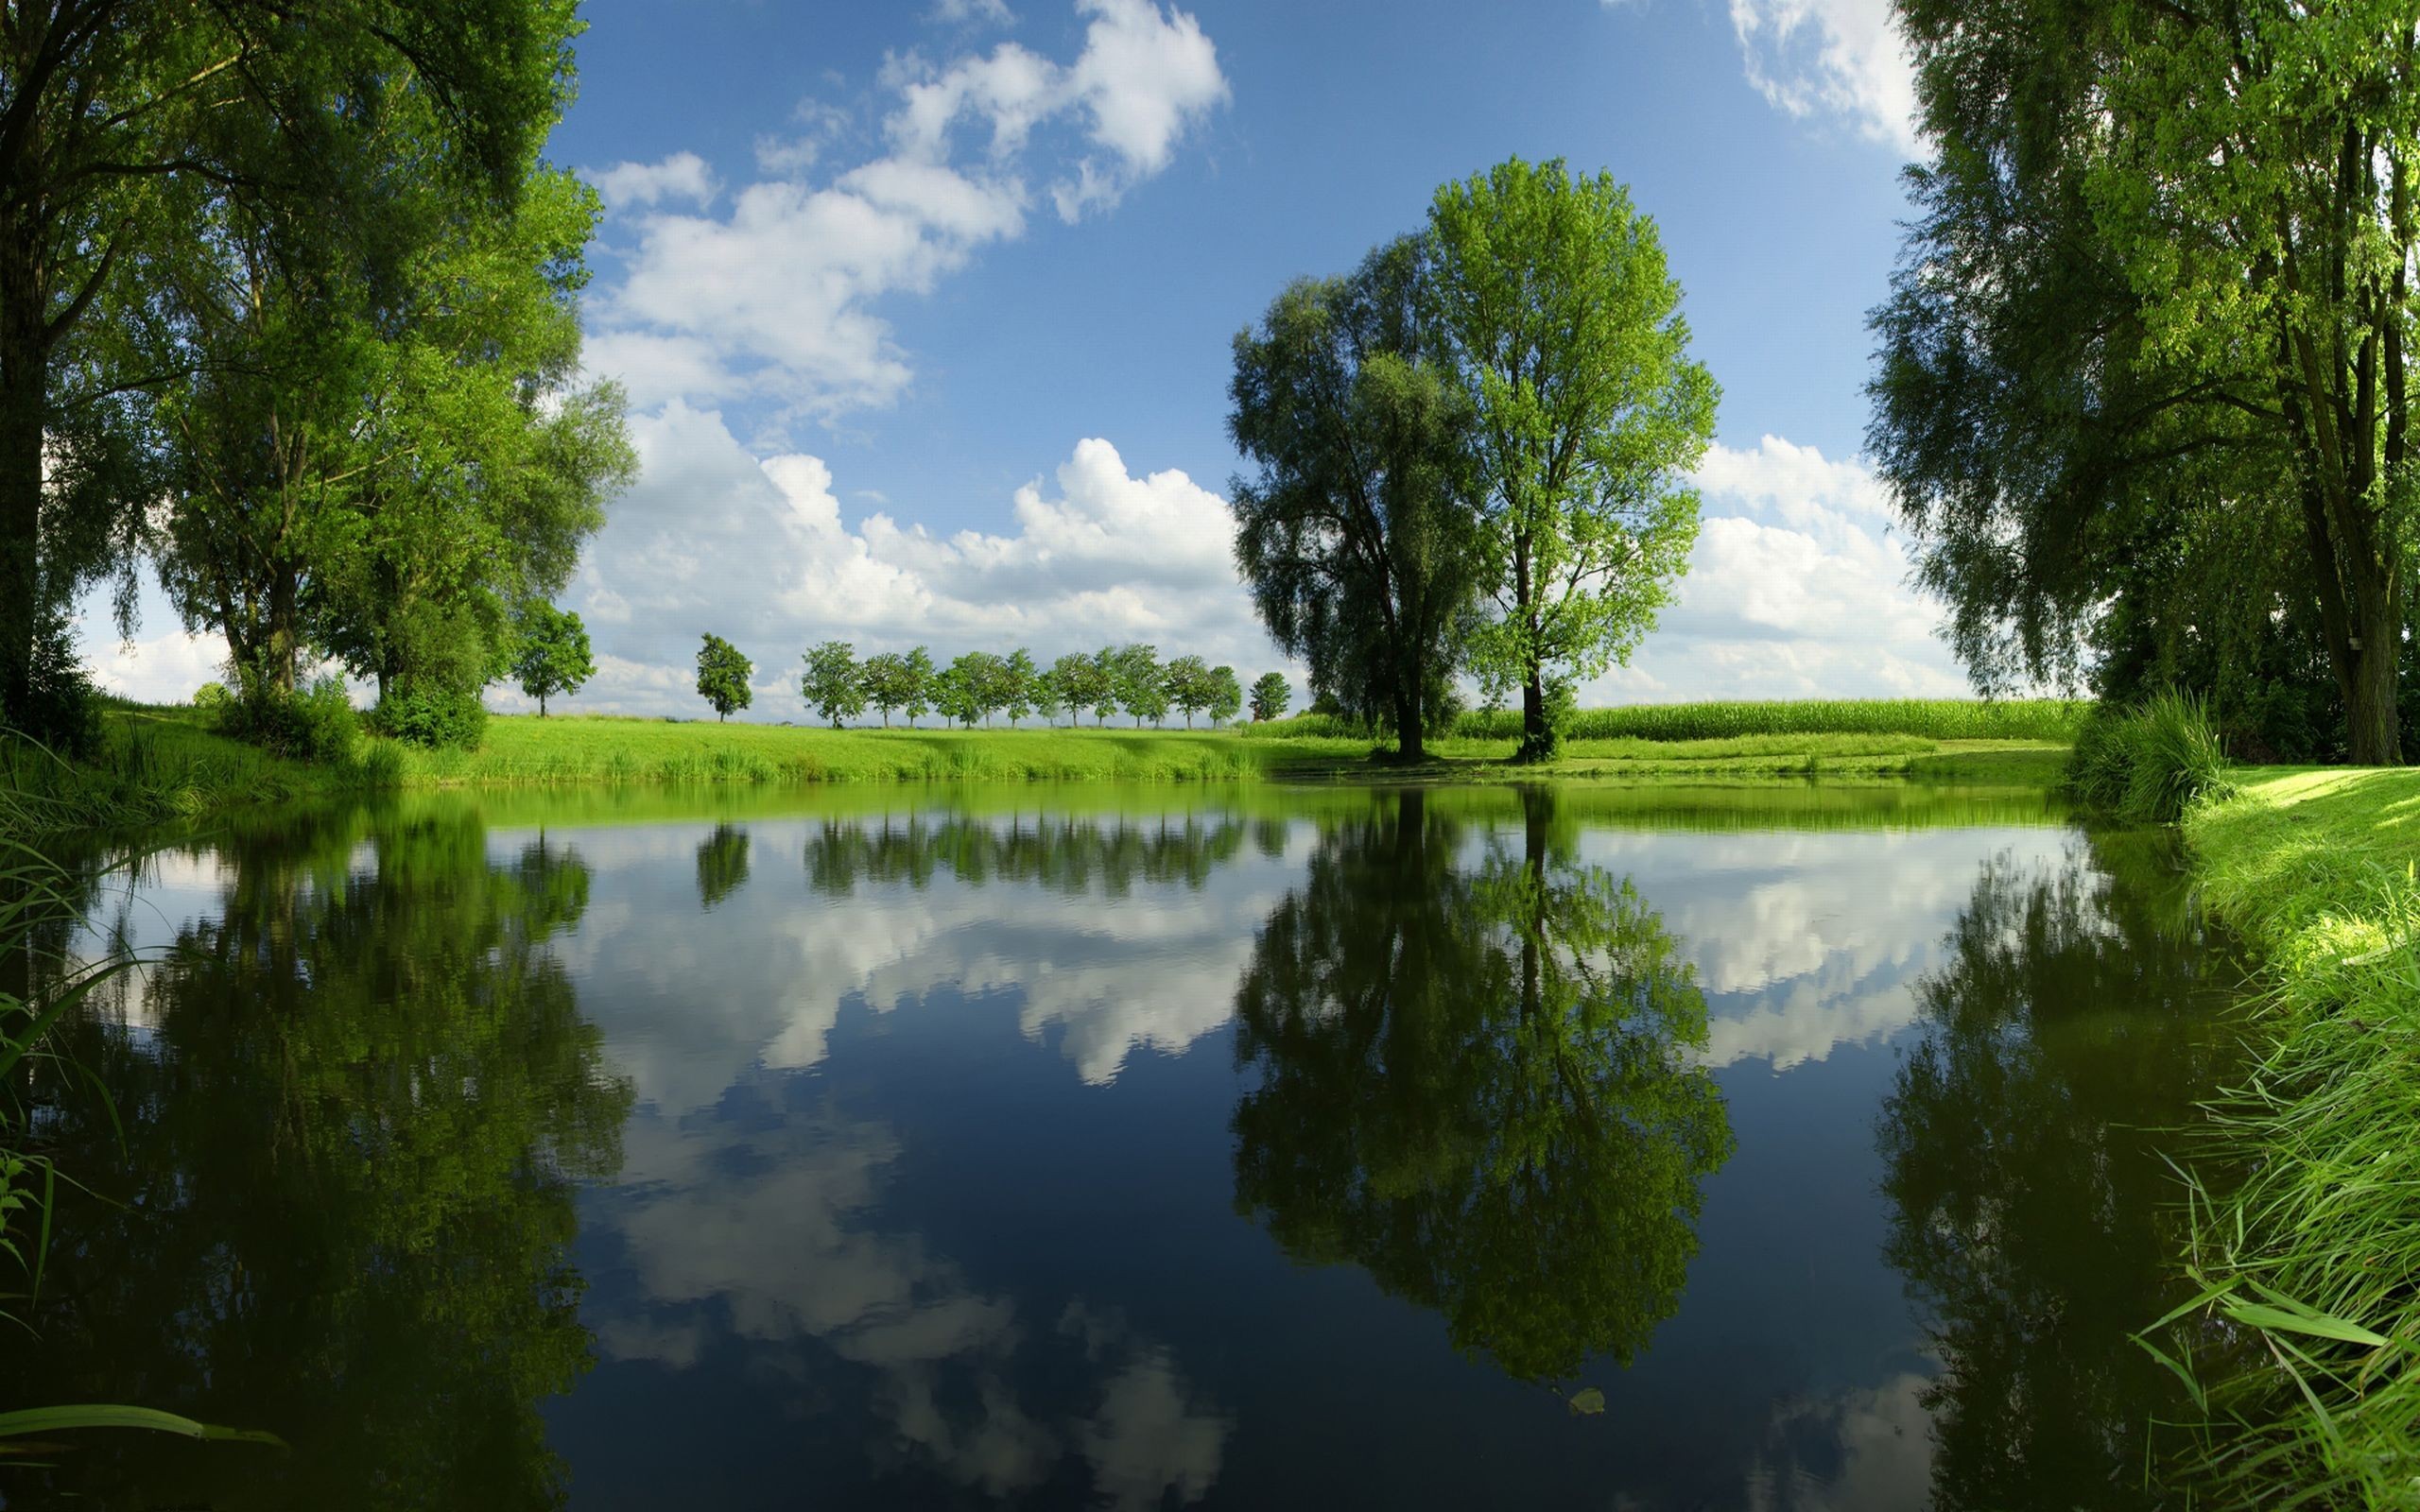 General 2560x1600 water trees outdoors reflection nature landscape